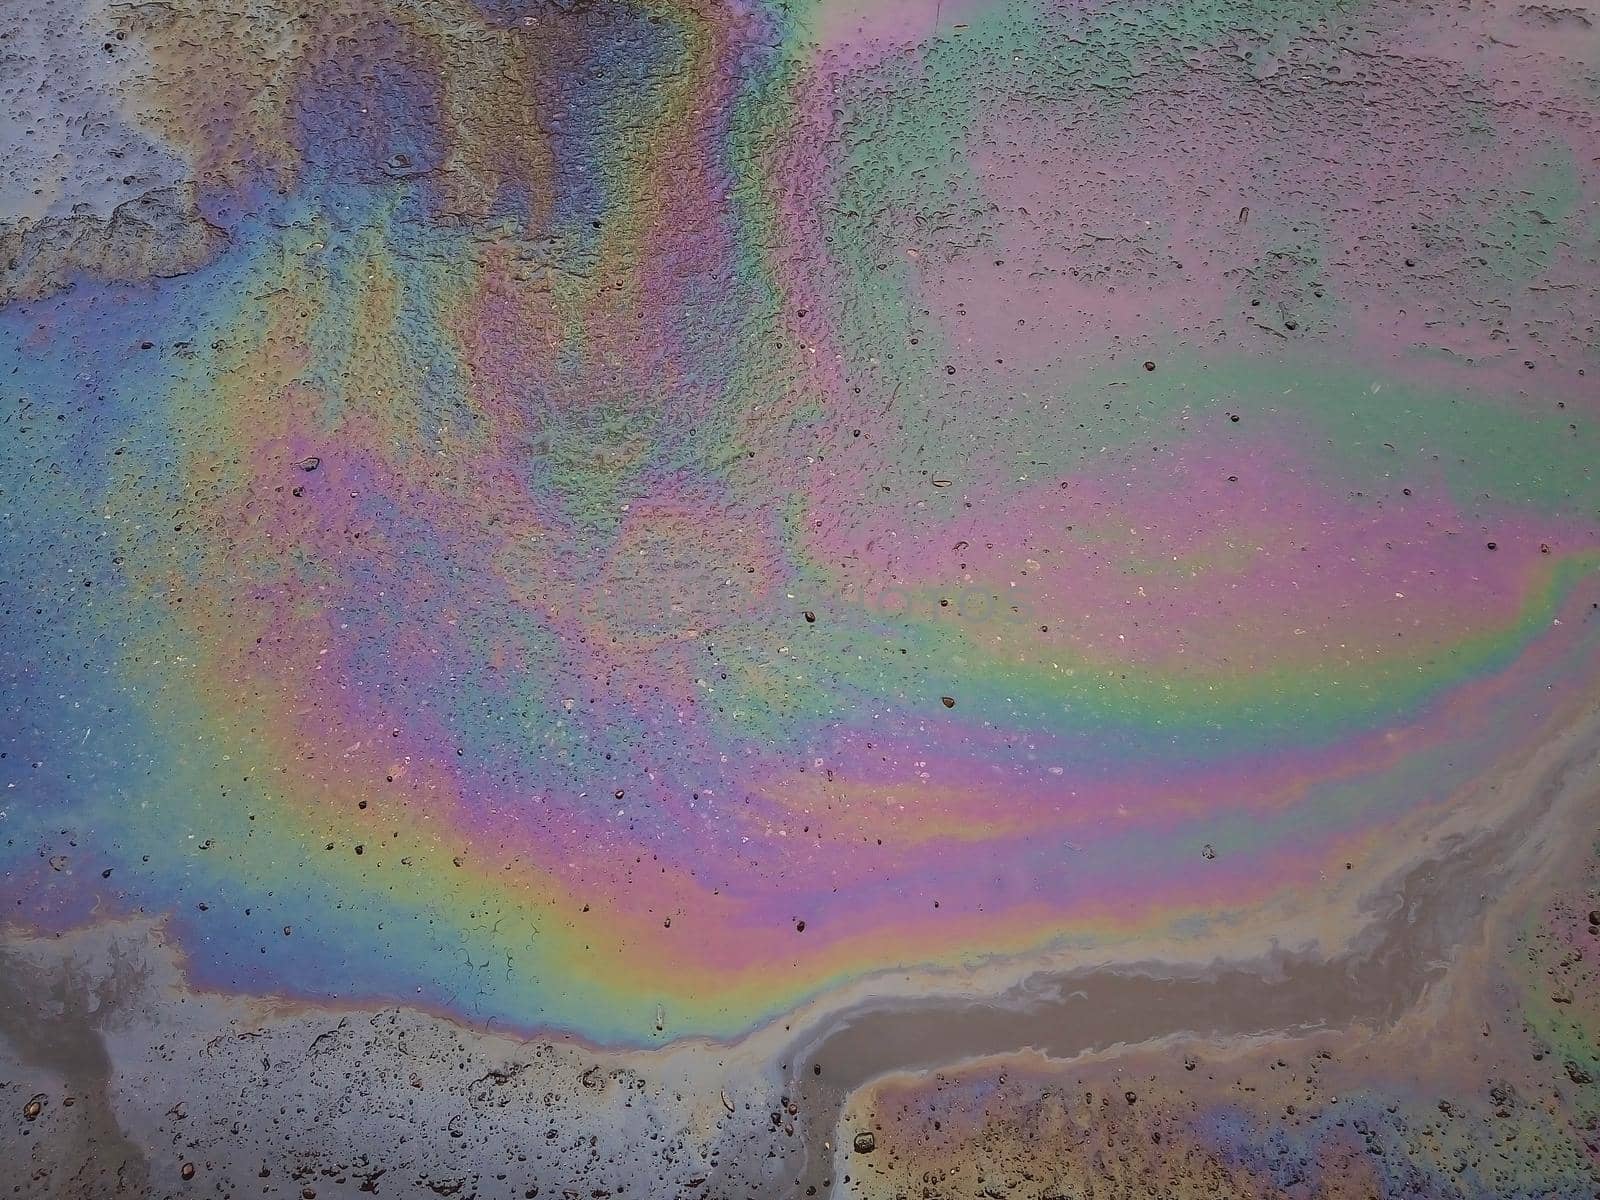 The color diluted with gasoline in a puddle. Environmental pollution.